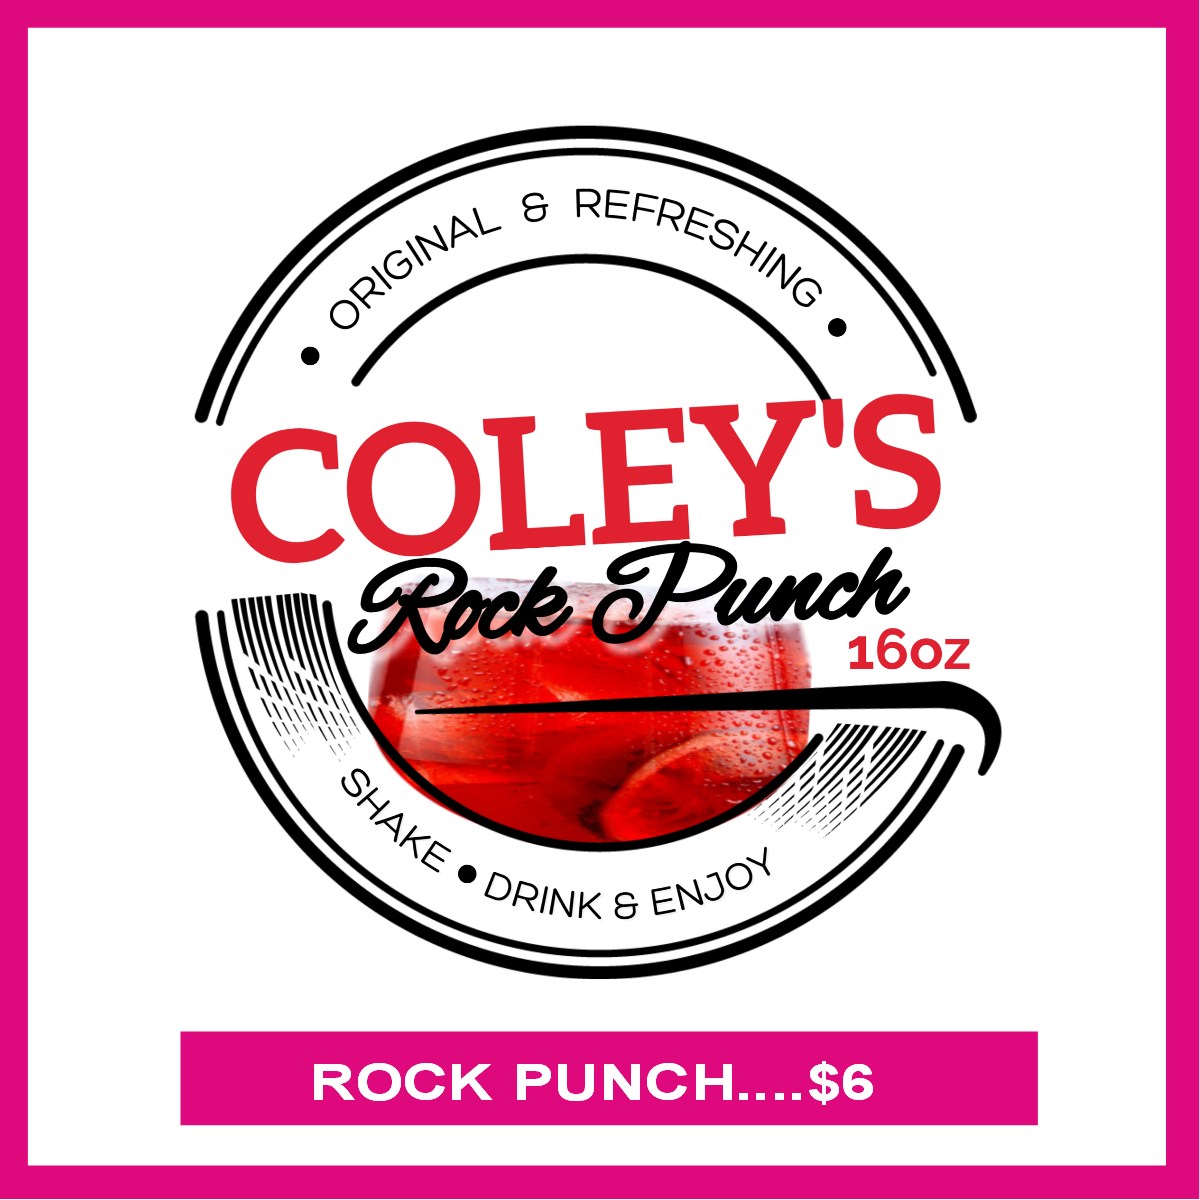 Coley's Landed on the Rock Punch